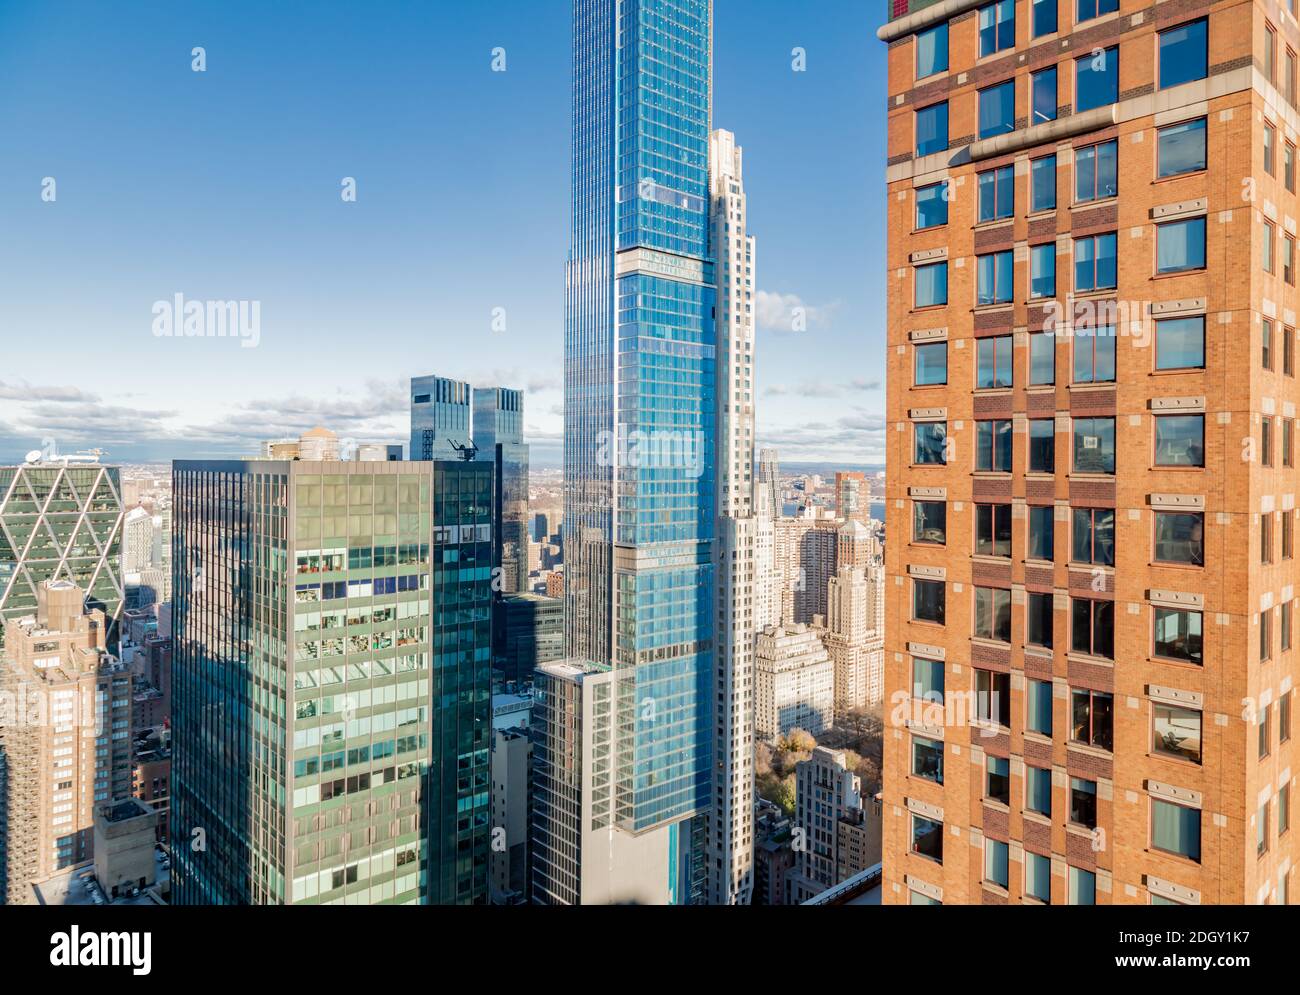 Aerial view of buildings in Midtown Manhattan, NY Stock Photo